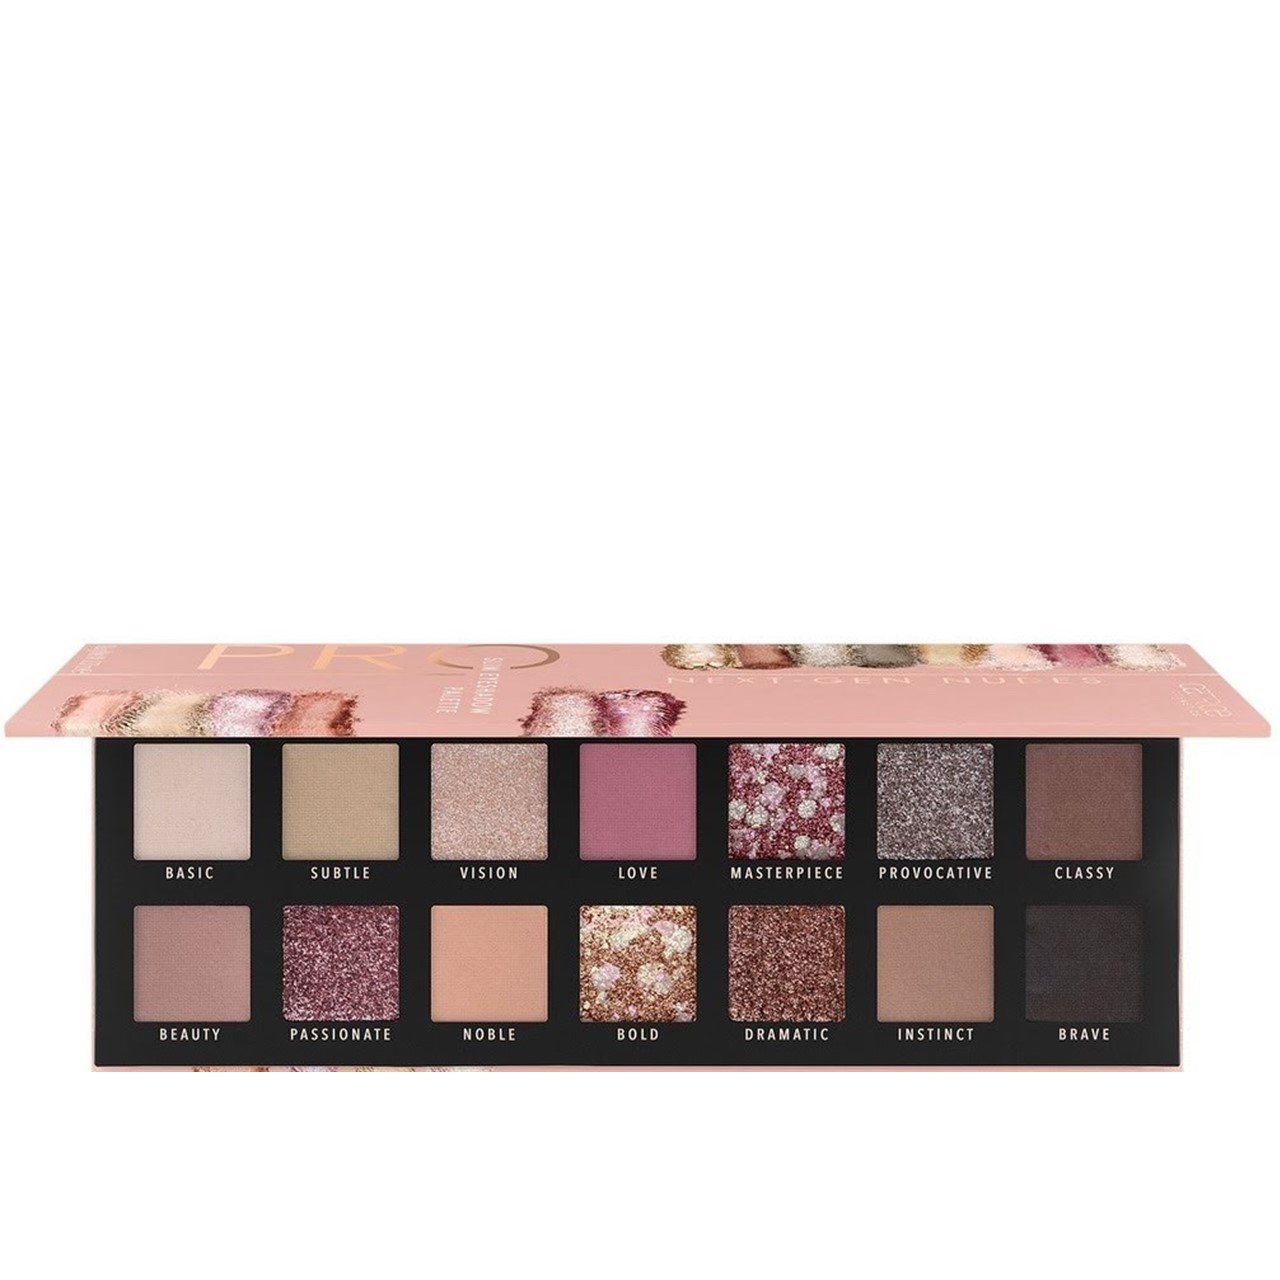 · Slim Next-Gen Eyeshadow Courage Catrice Beauty Buy 10 Nudes Pro Is Palette USA